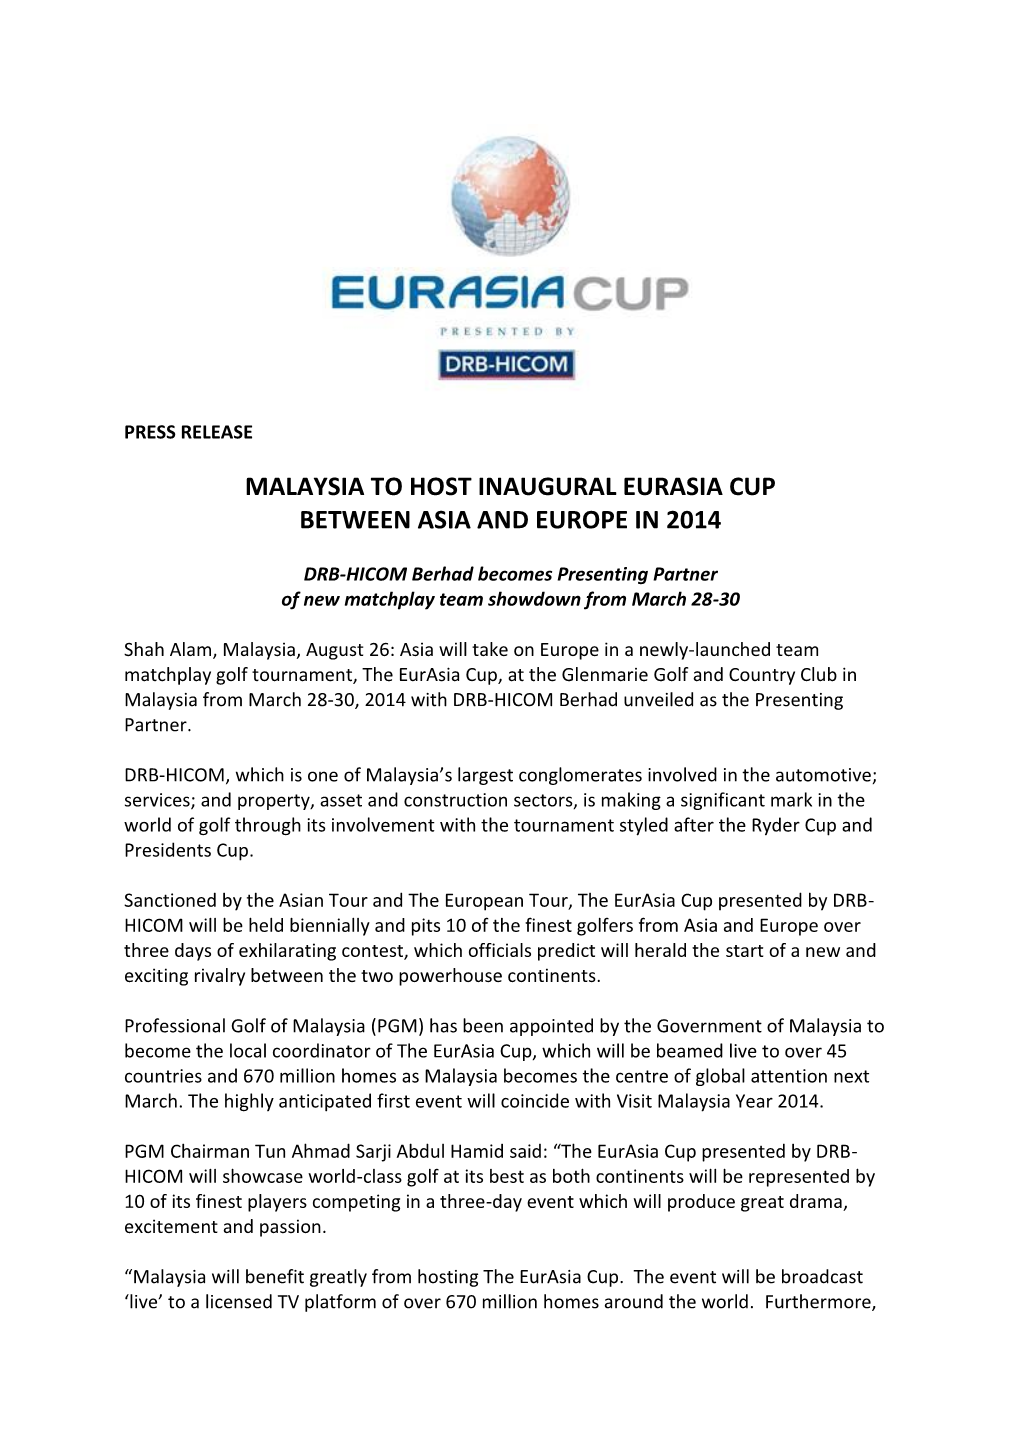 Malaysia to Host Inaugural Eurasia Cup Between Asia and Europe in 2014